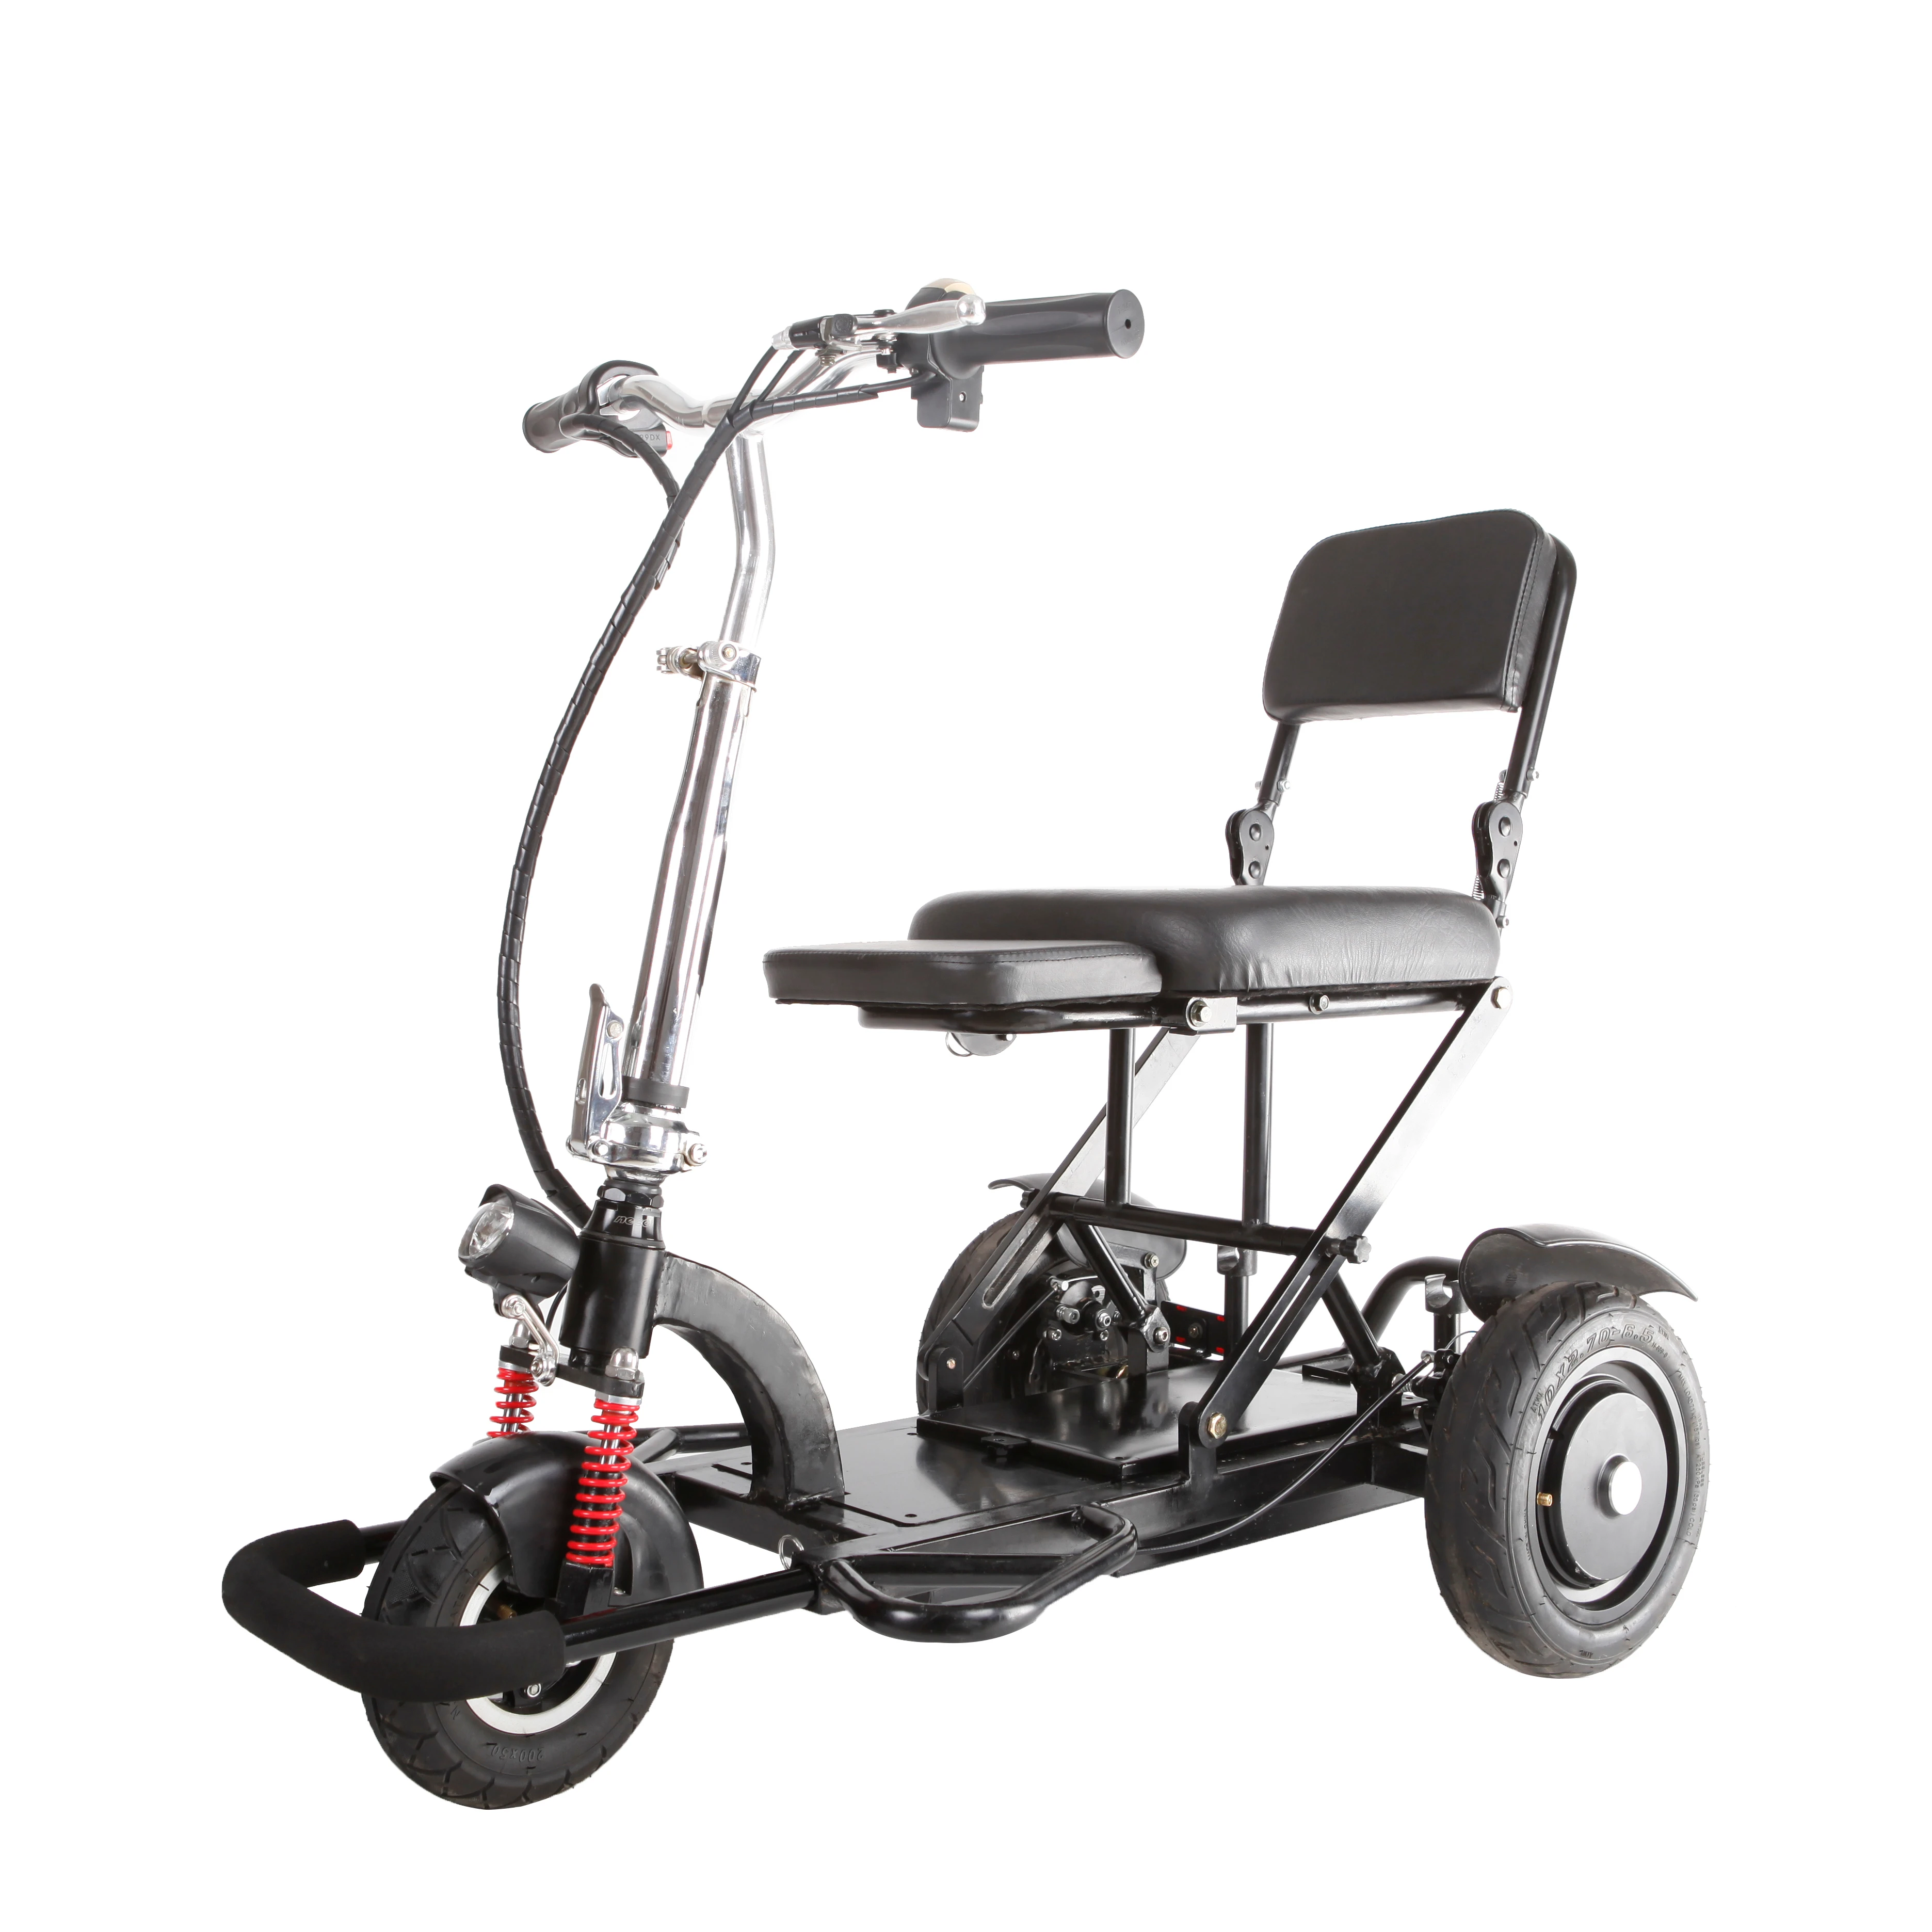 

elderly mobility disability adult safty electric 3 wheel scooters foldable for old people/disabled